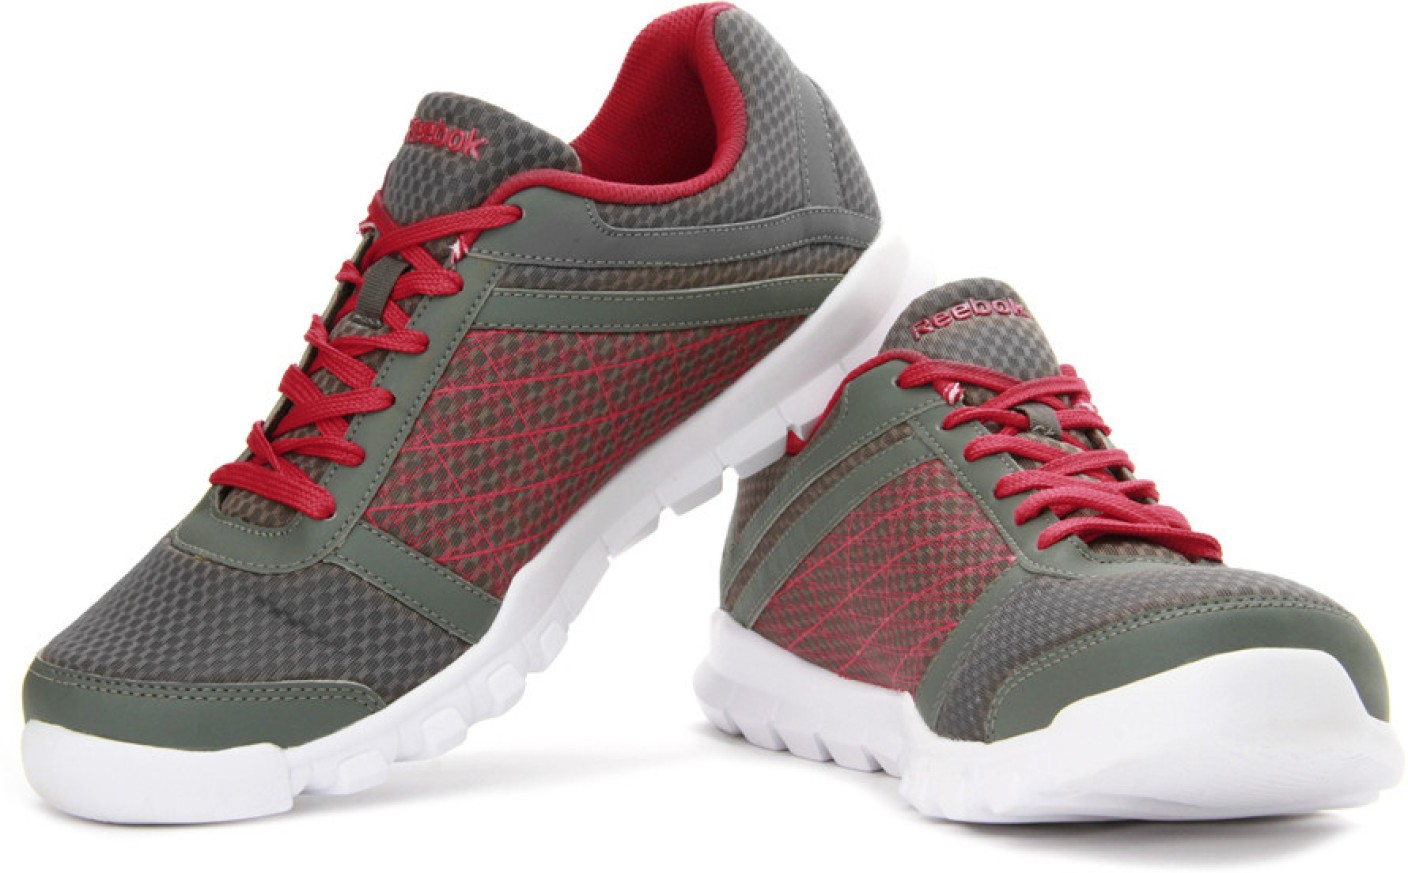 Reebok Country Ride LP Running Shoes For Men - Buy Grey, Red, White ...